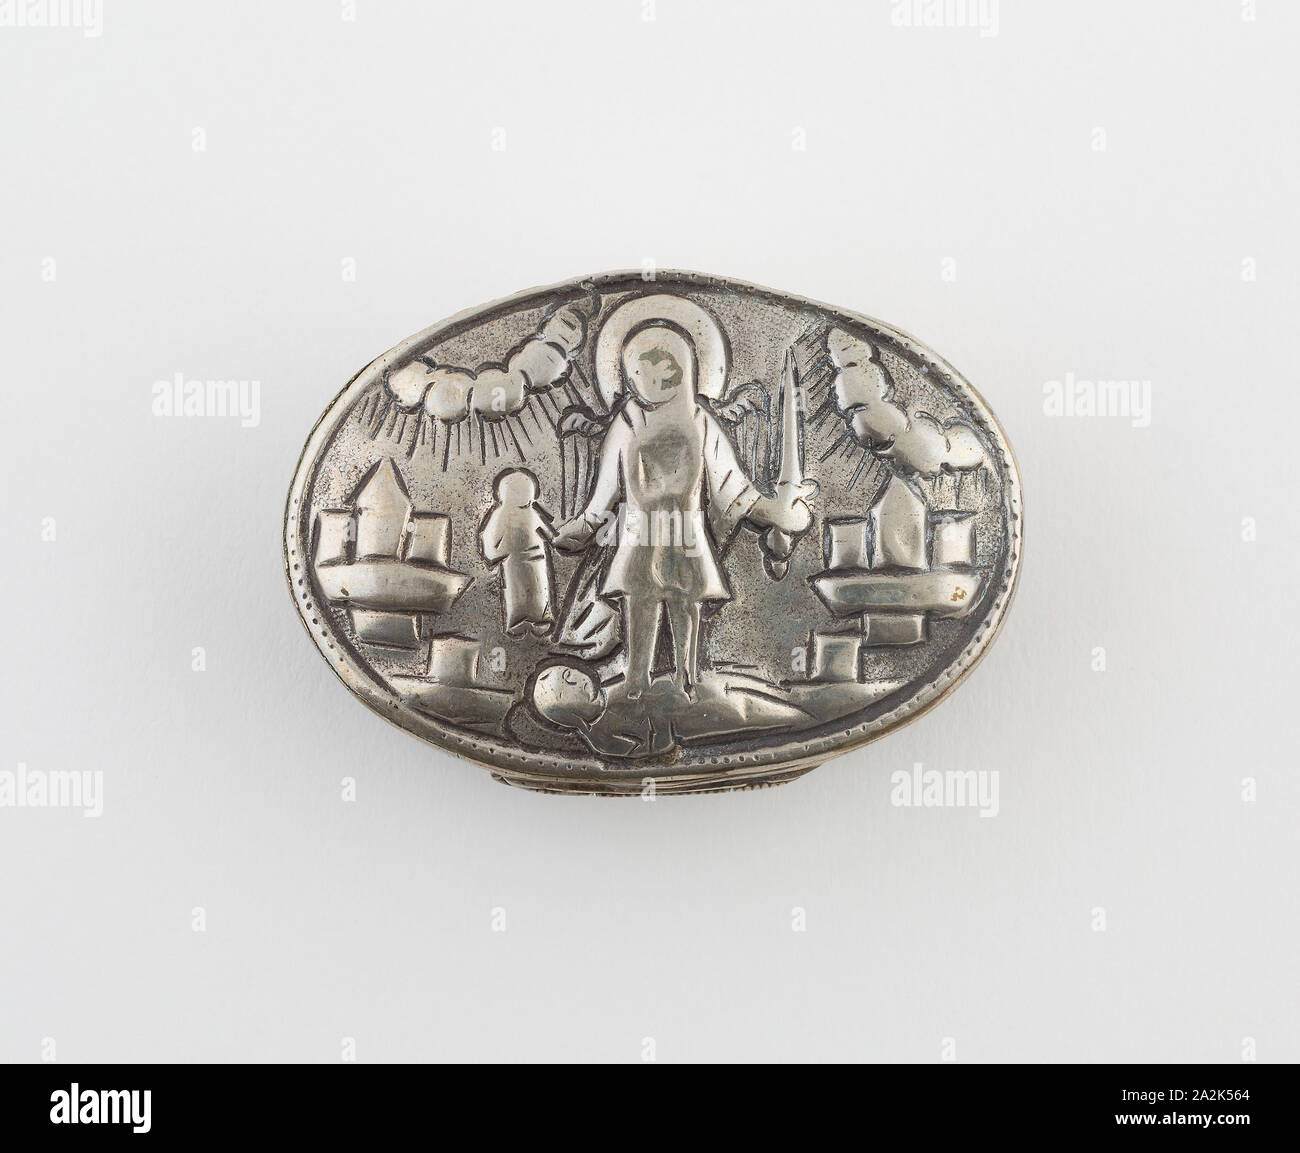 Snuffbox with Scene of St. Michael Triumphing Over the Devil, early 18th century, Continental Europe, Europe, Silver-plated brass, 5.1 × 3.2 cm (2 × 1 1/4 in Stock Photo